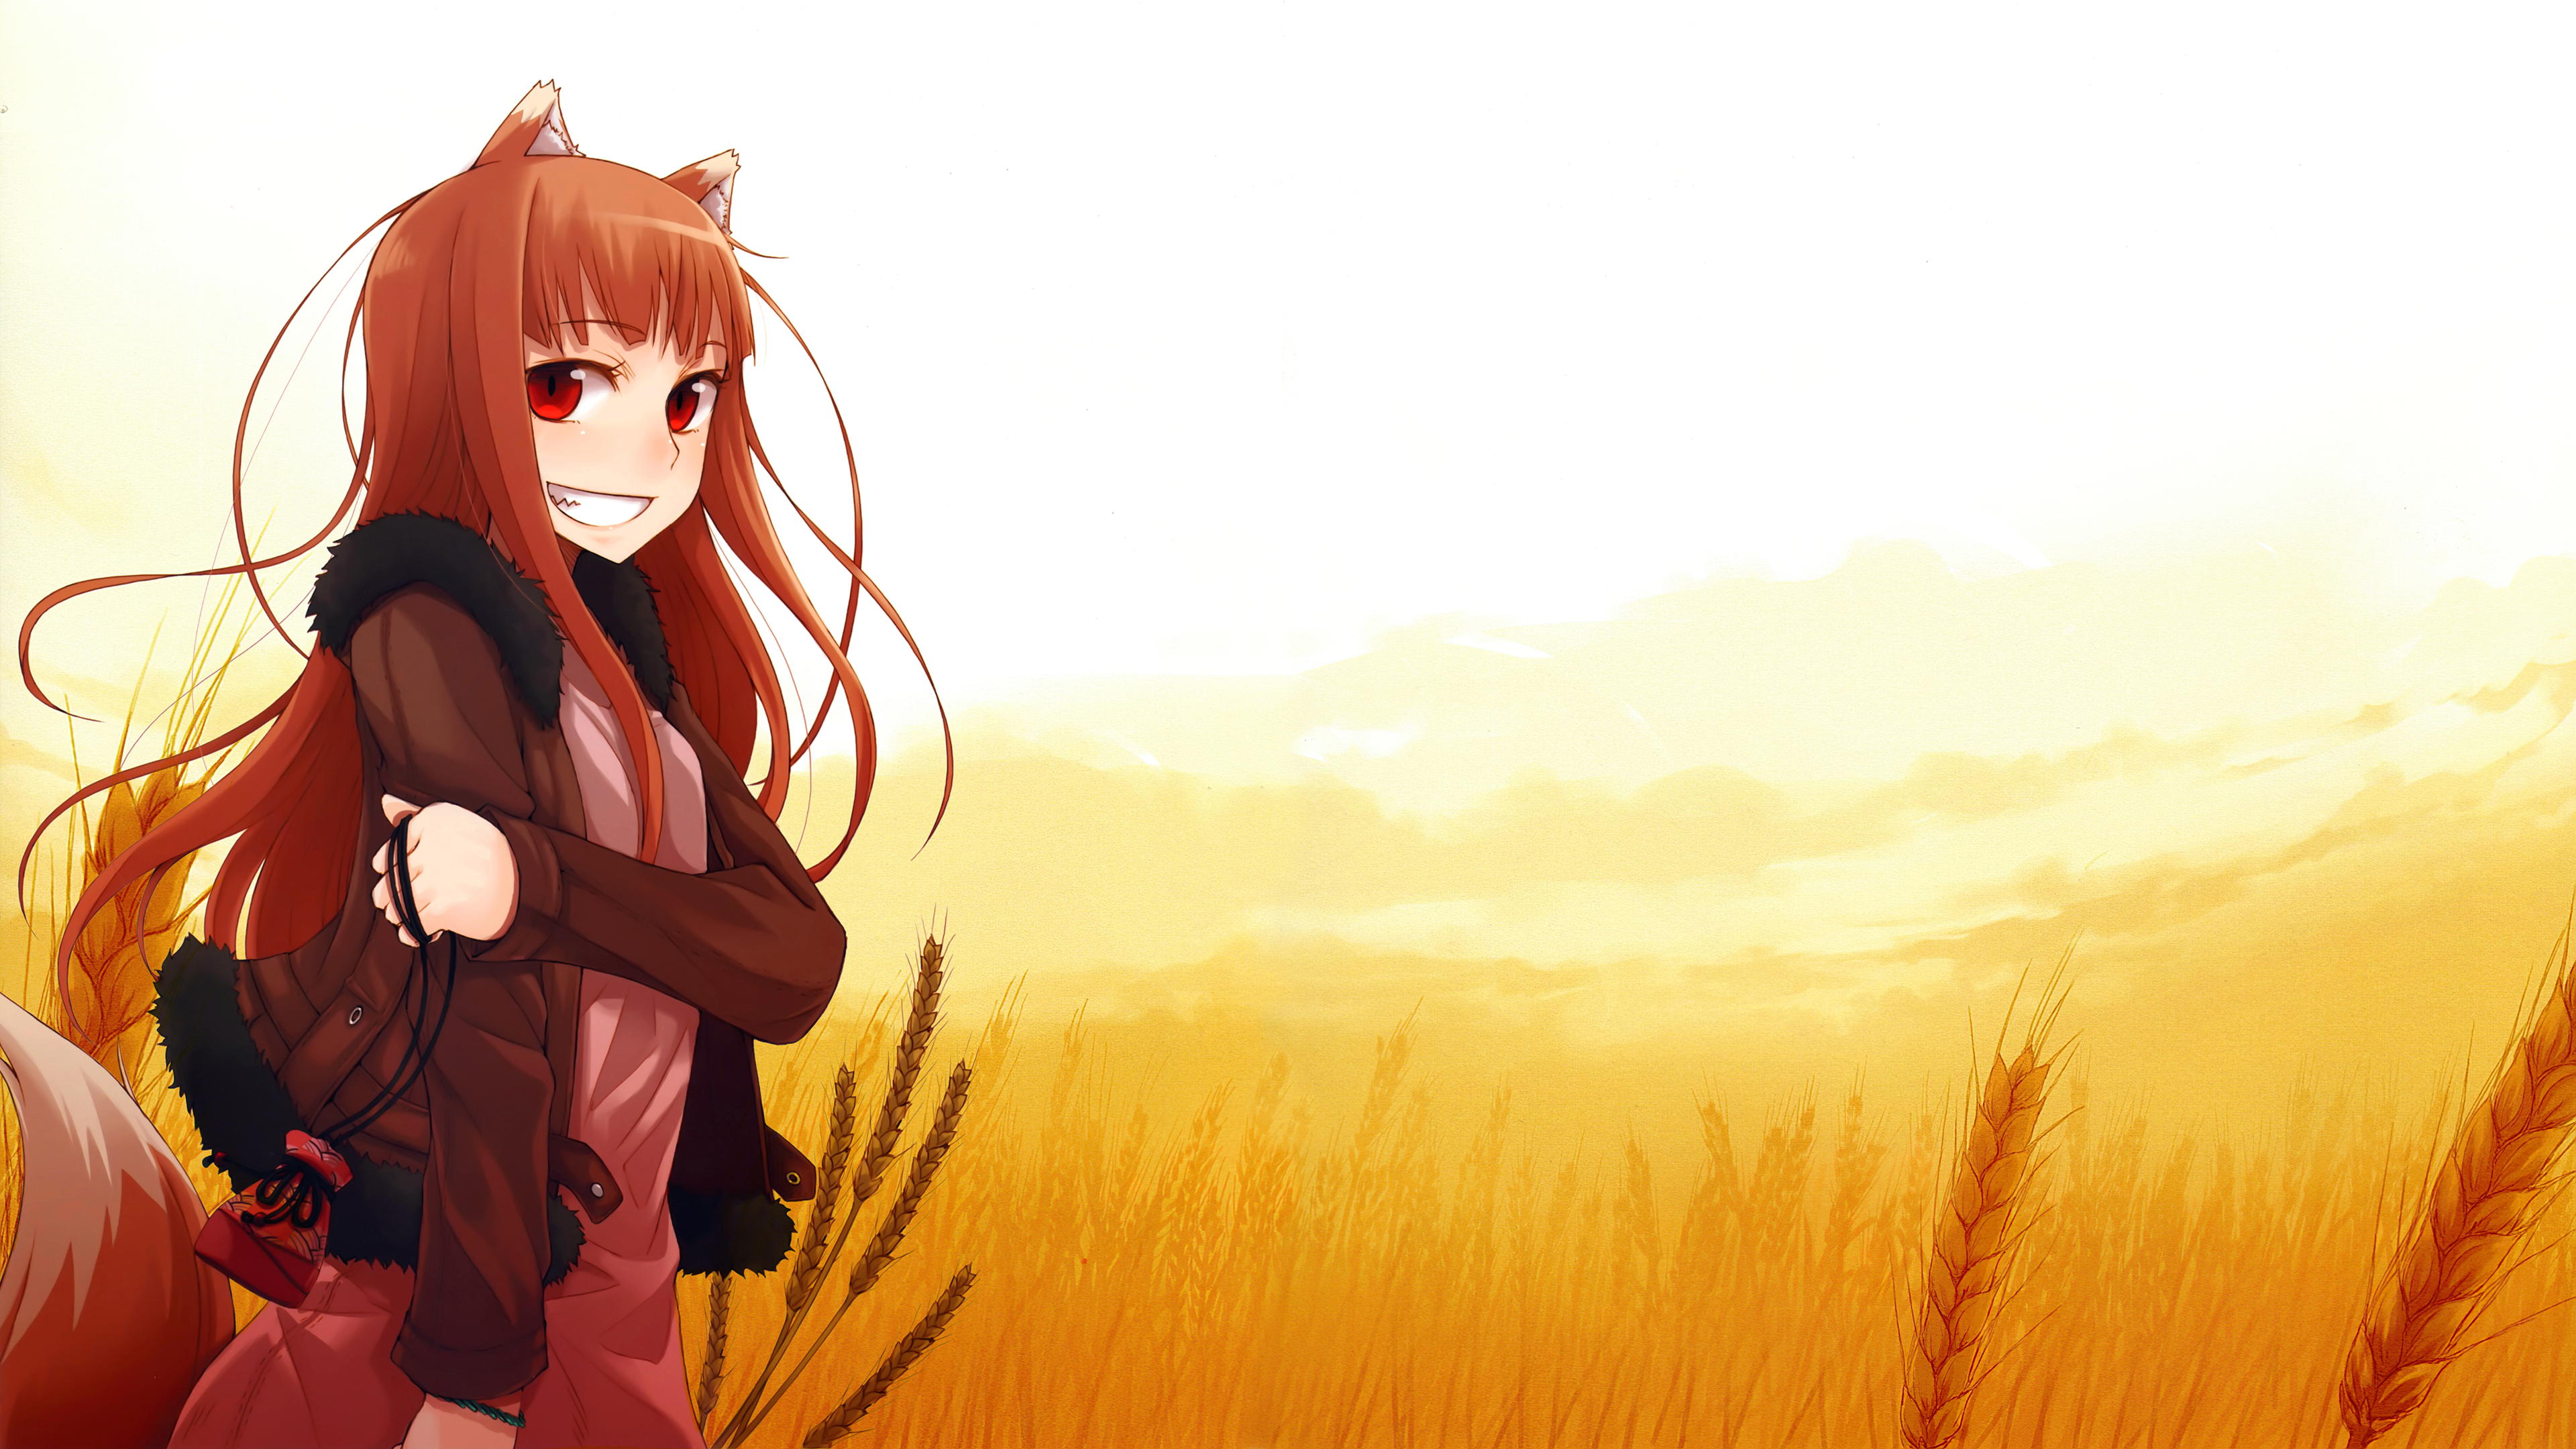 4K wallpaper I made after watching Spice & Wolf, then reading it